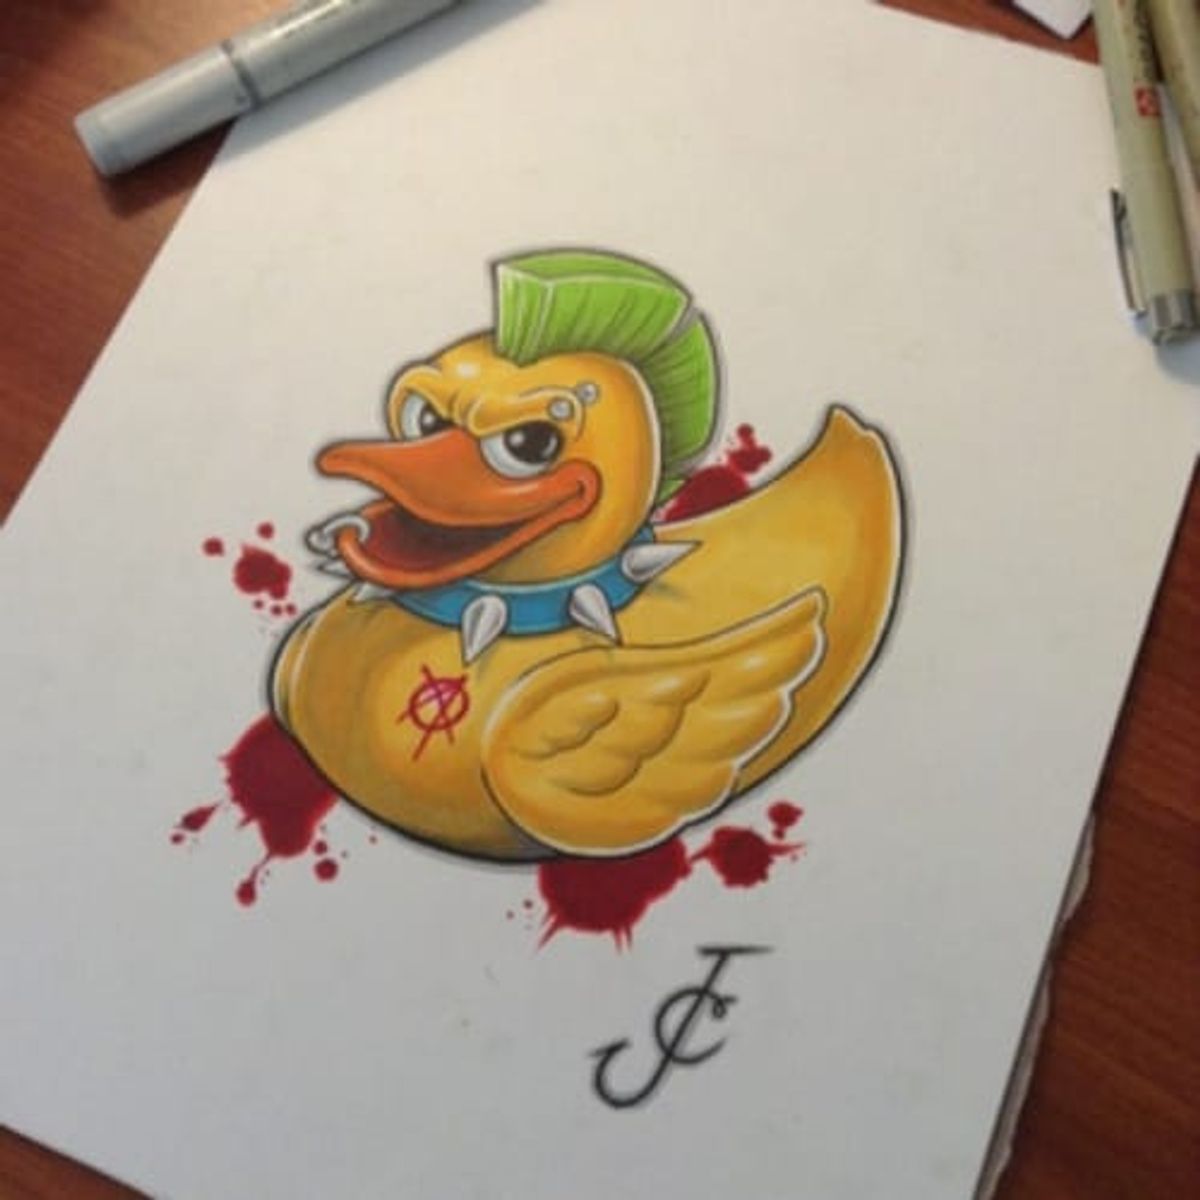 Tattoo Devil Duckie Rubber Ducky with Piercing & A Bunch of Tats